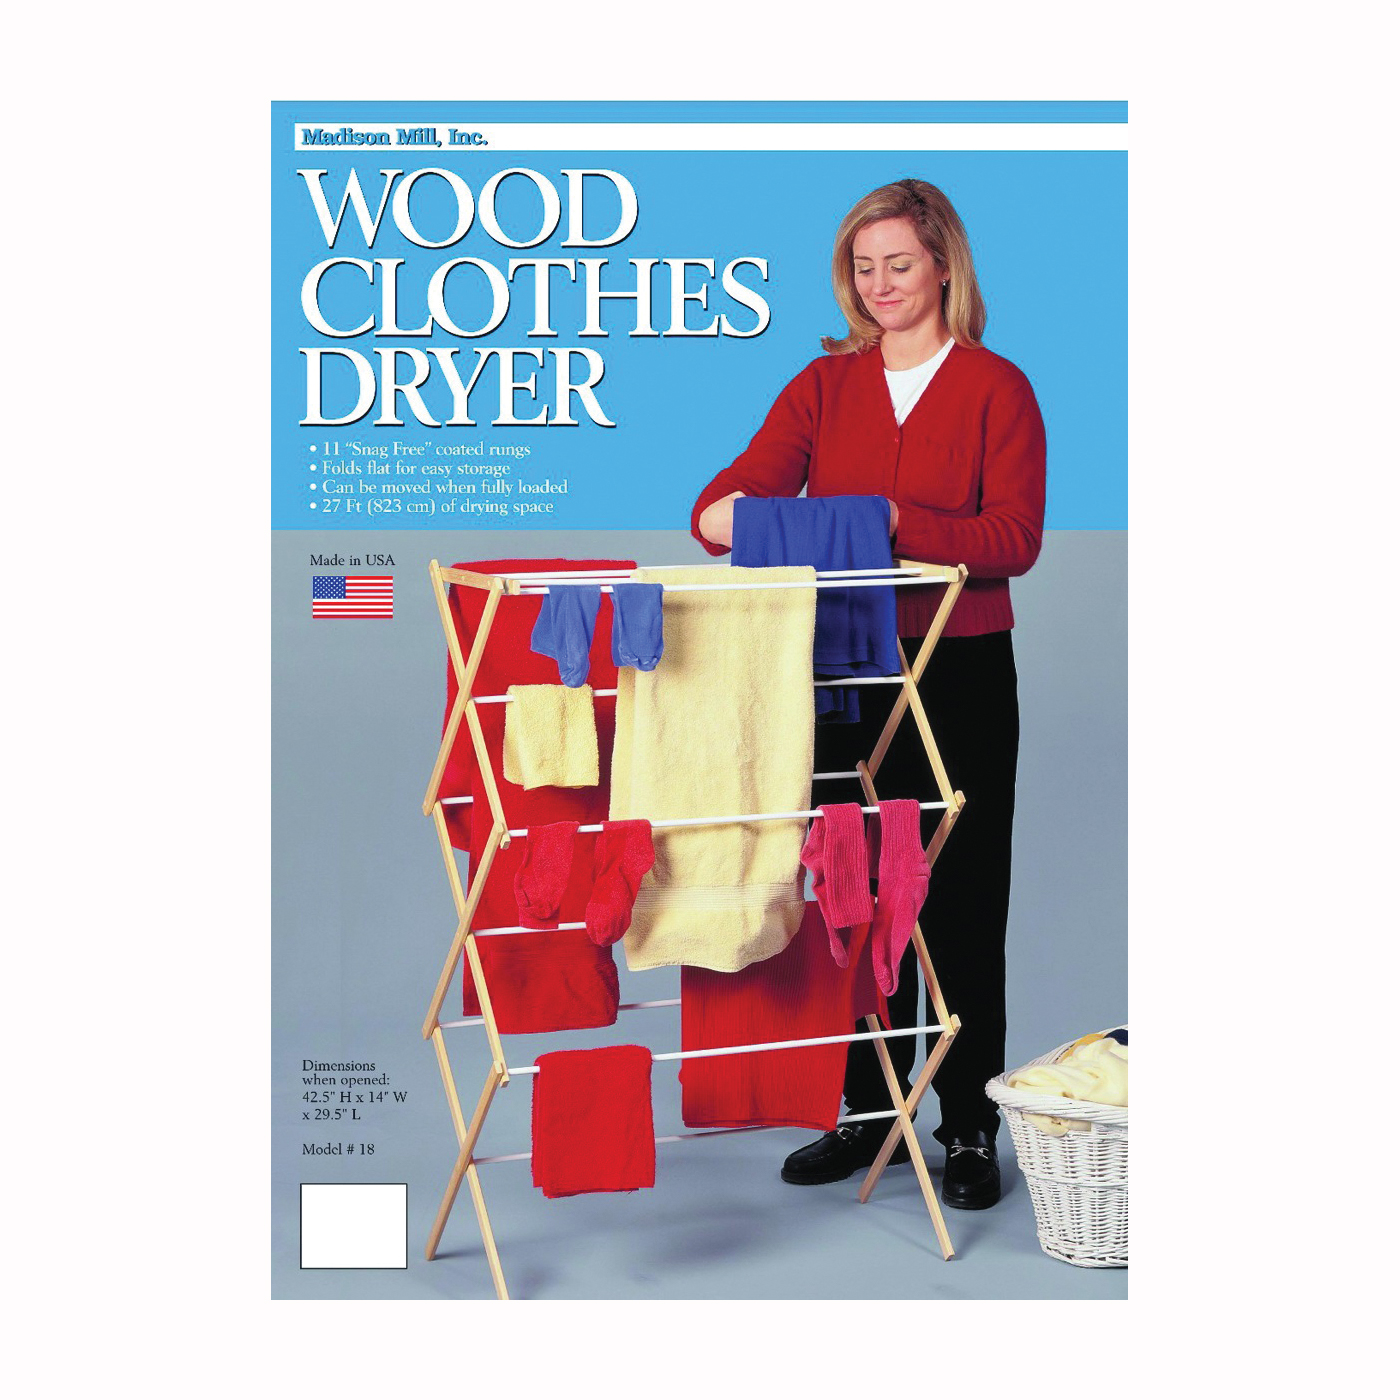 18 Cloth Dryer, Wood, 14 in W, 42-1/2 in H, 29-1/2 in L